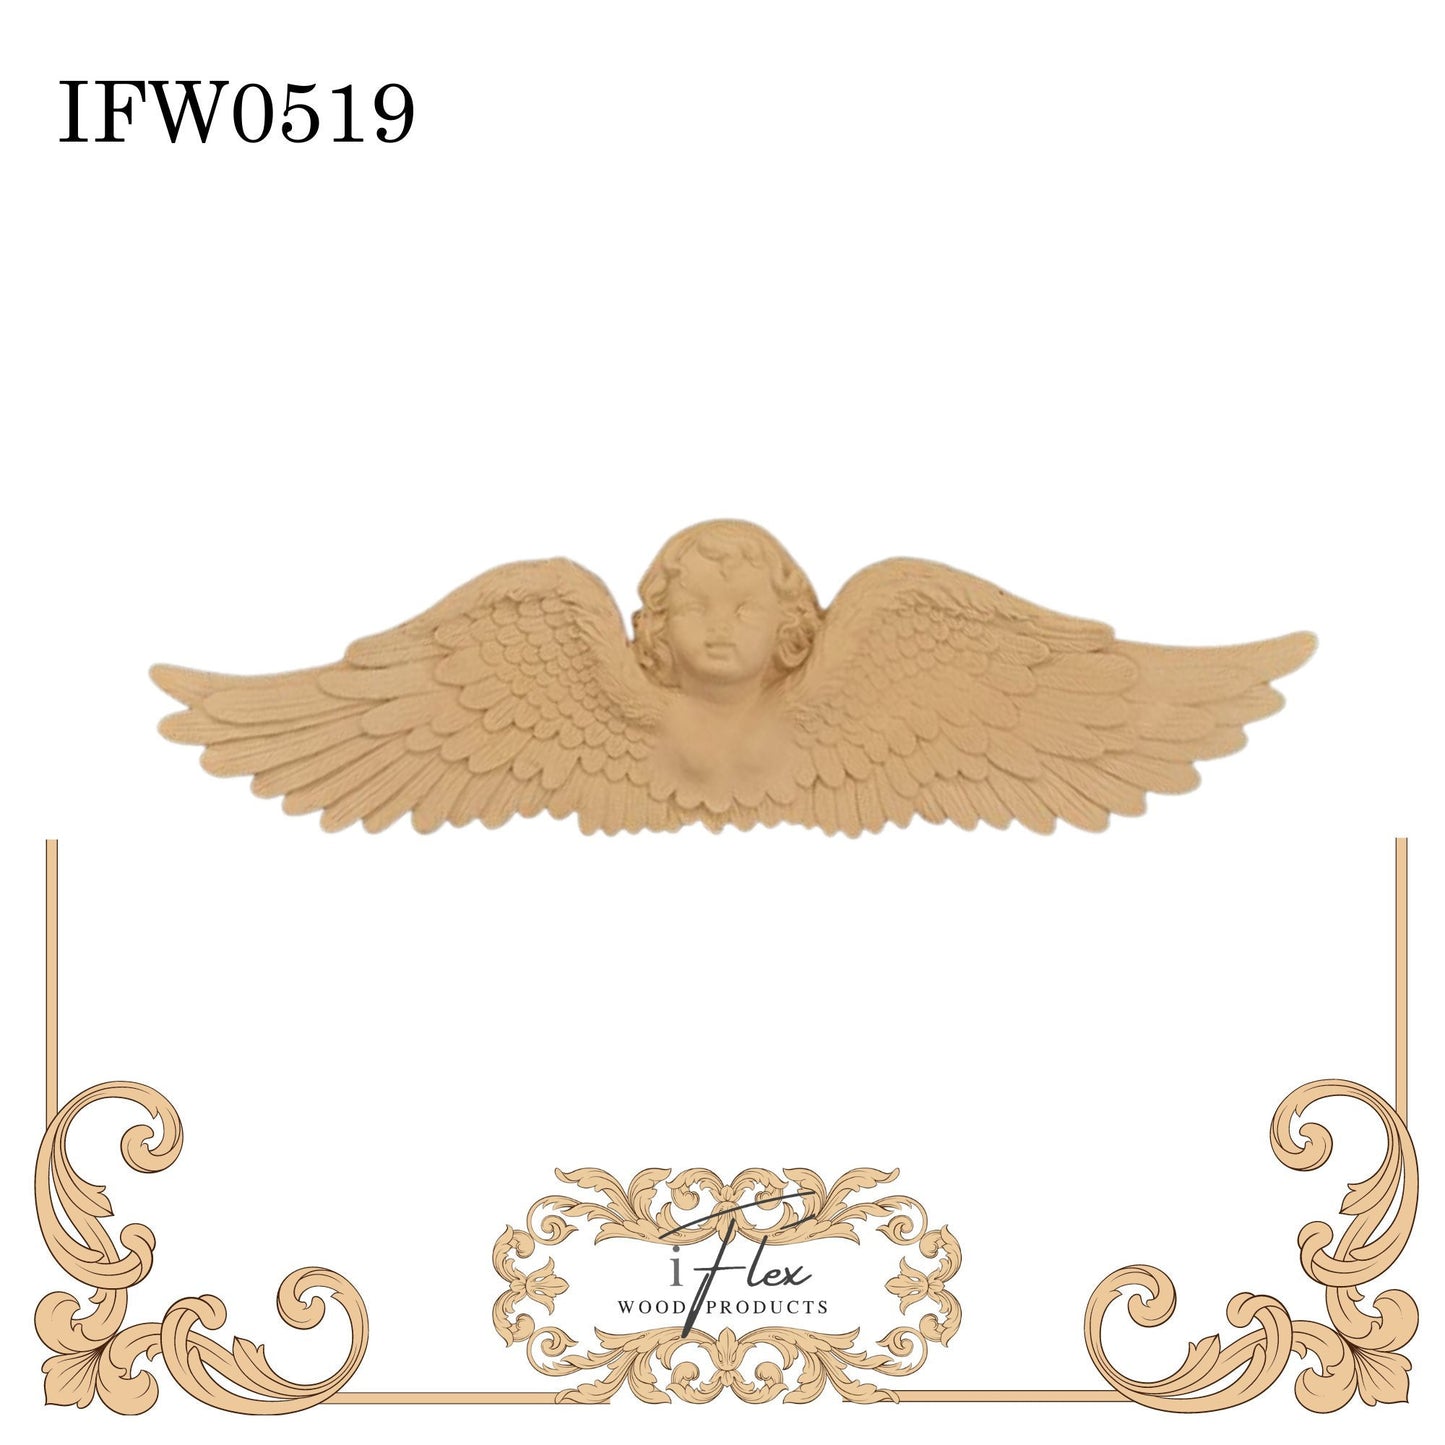 IFW 0519  iFlex Wood Products angel wings bendable mouldings, flexible, wooden appliques